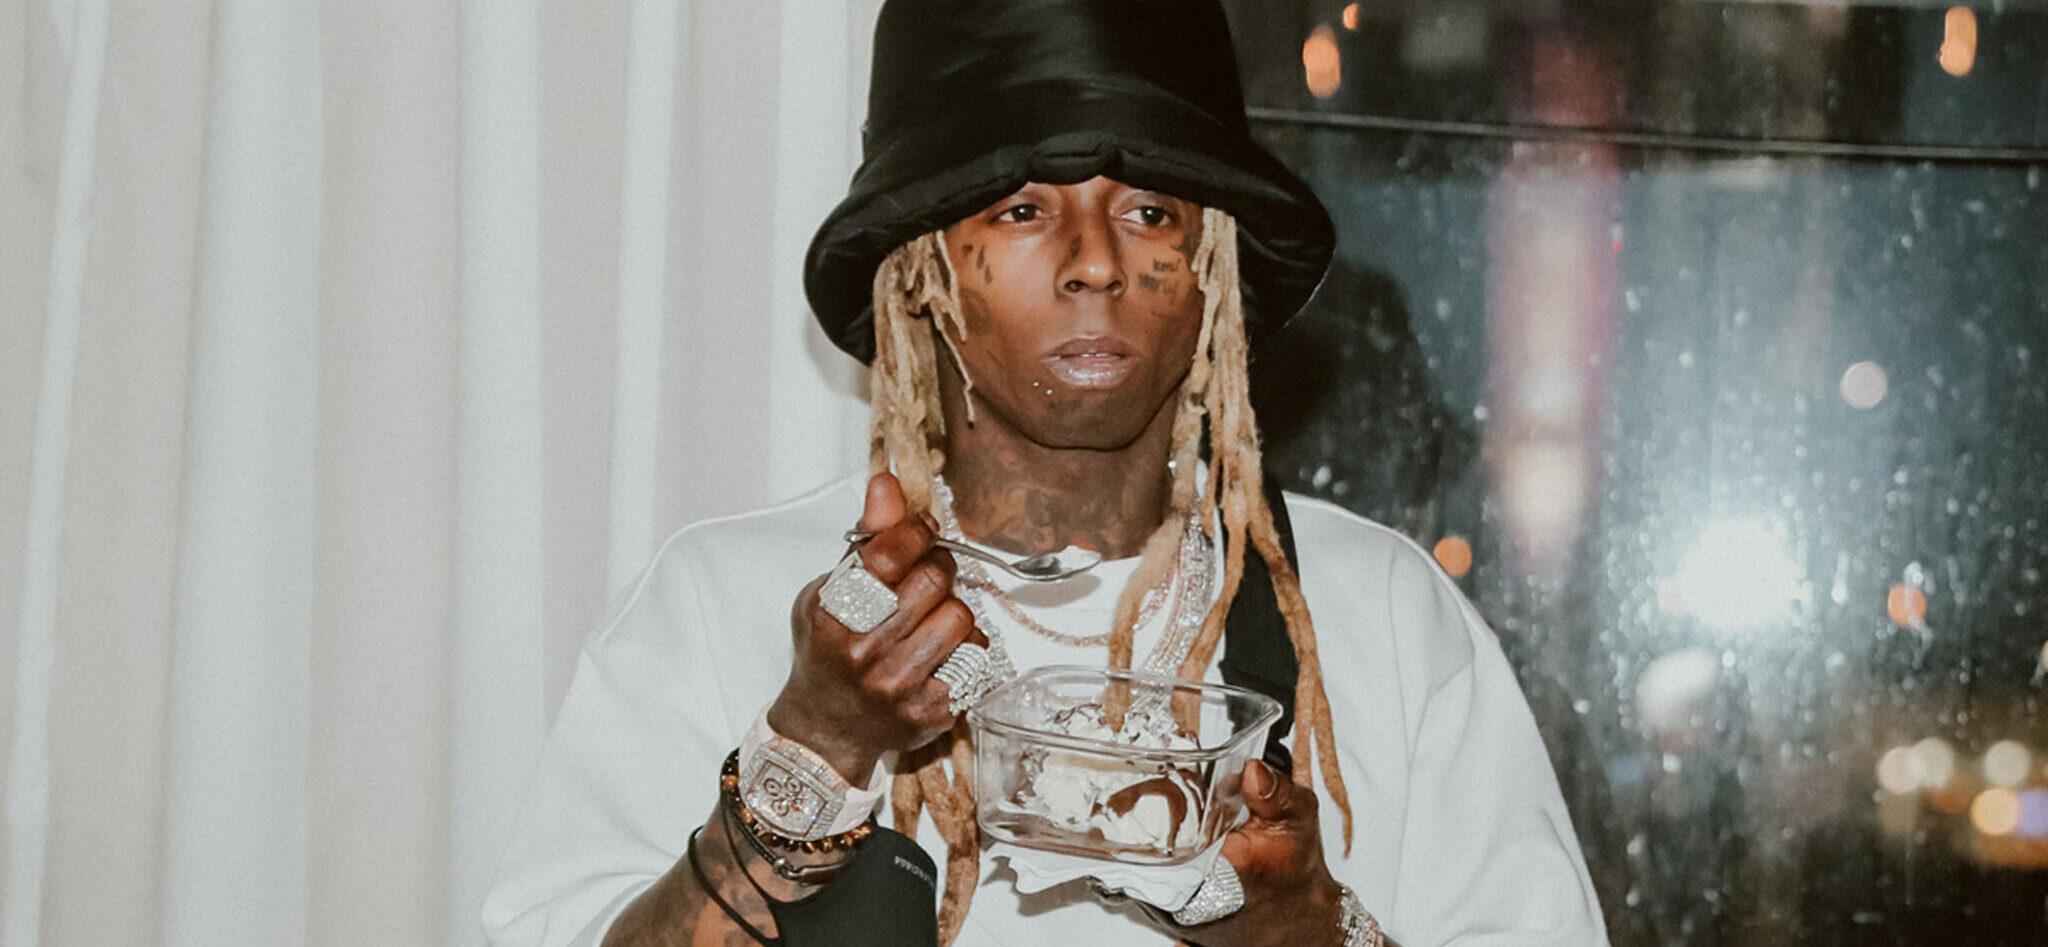 Lil’ Wayne Denies Discrimination Allegations Made By His Former Private Chef